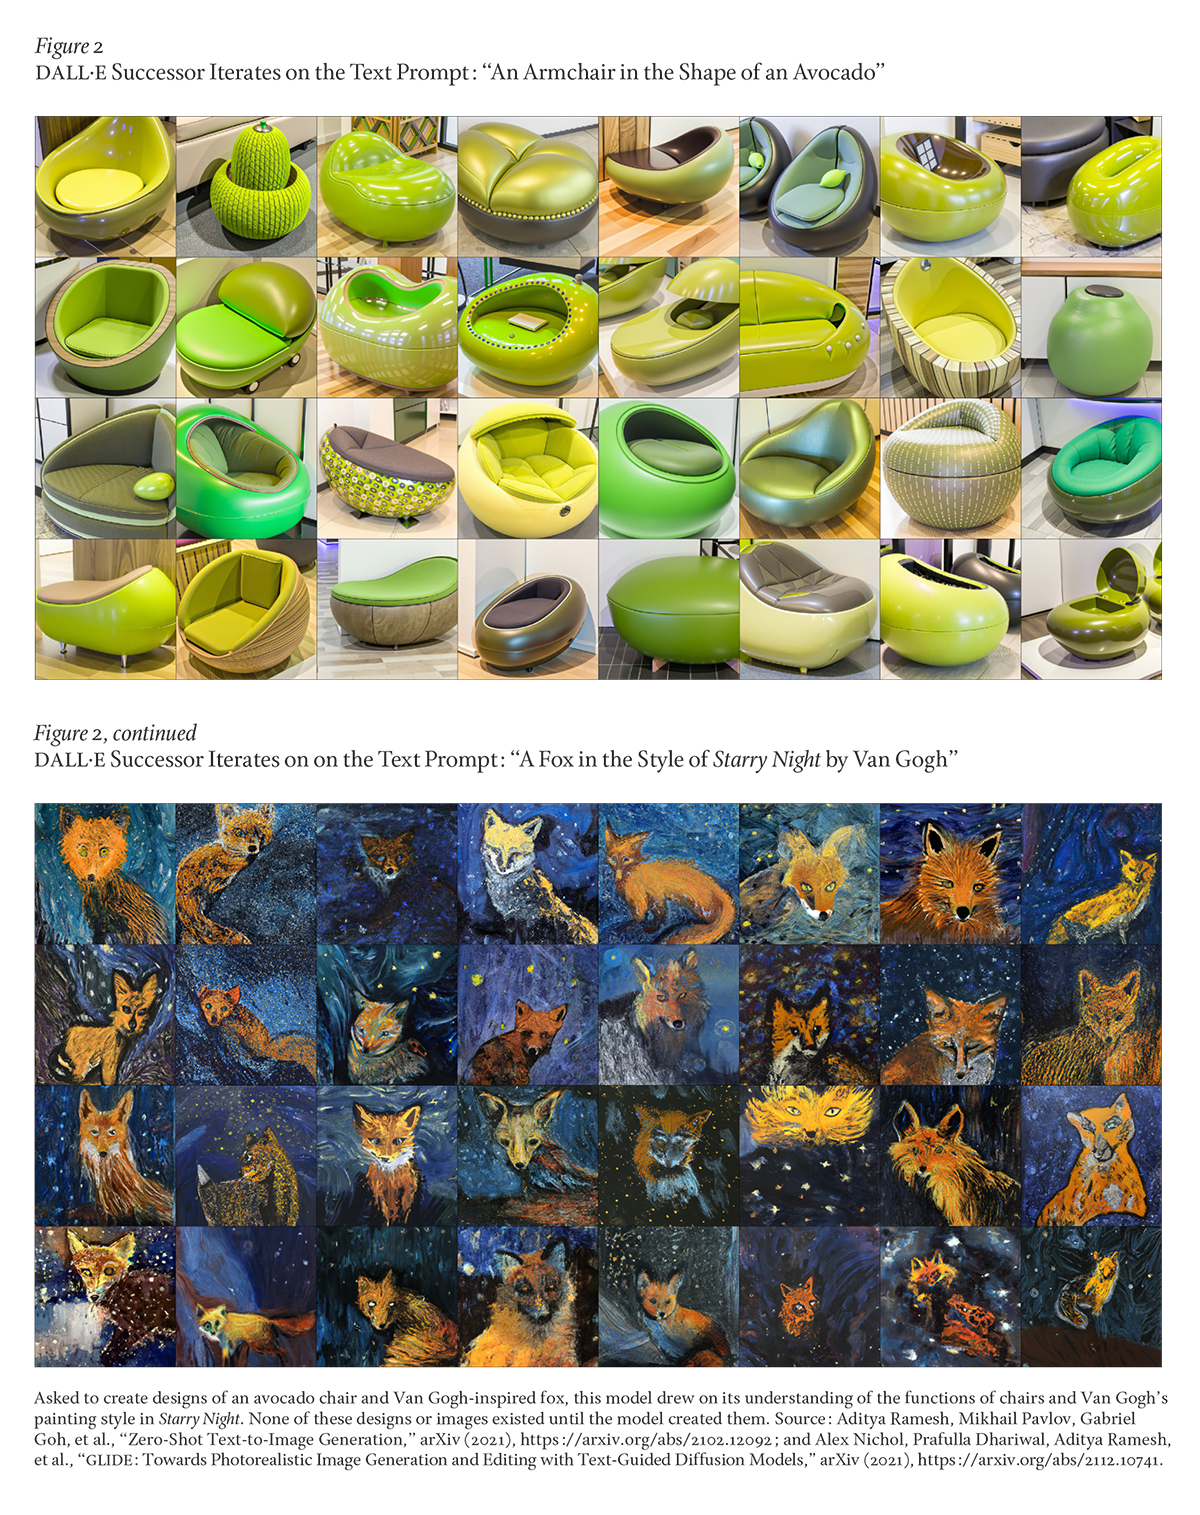 DALL·E Successor Iterates on the Text Prompts: “An Armchair in the Shape of an Avocado” and “A Fox in the Style of Starry Night by Van Gogh”